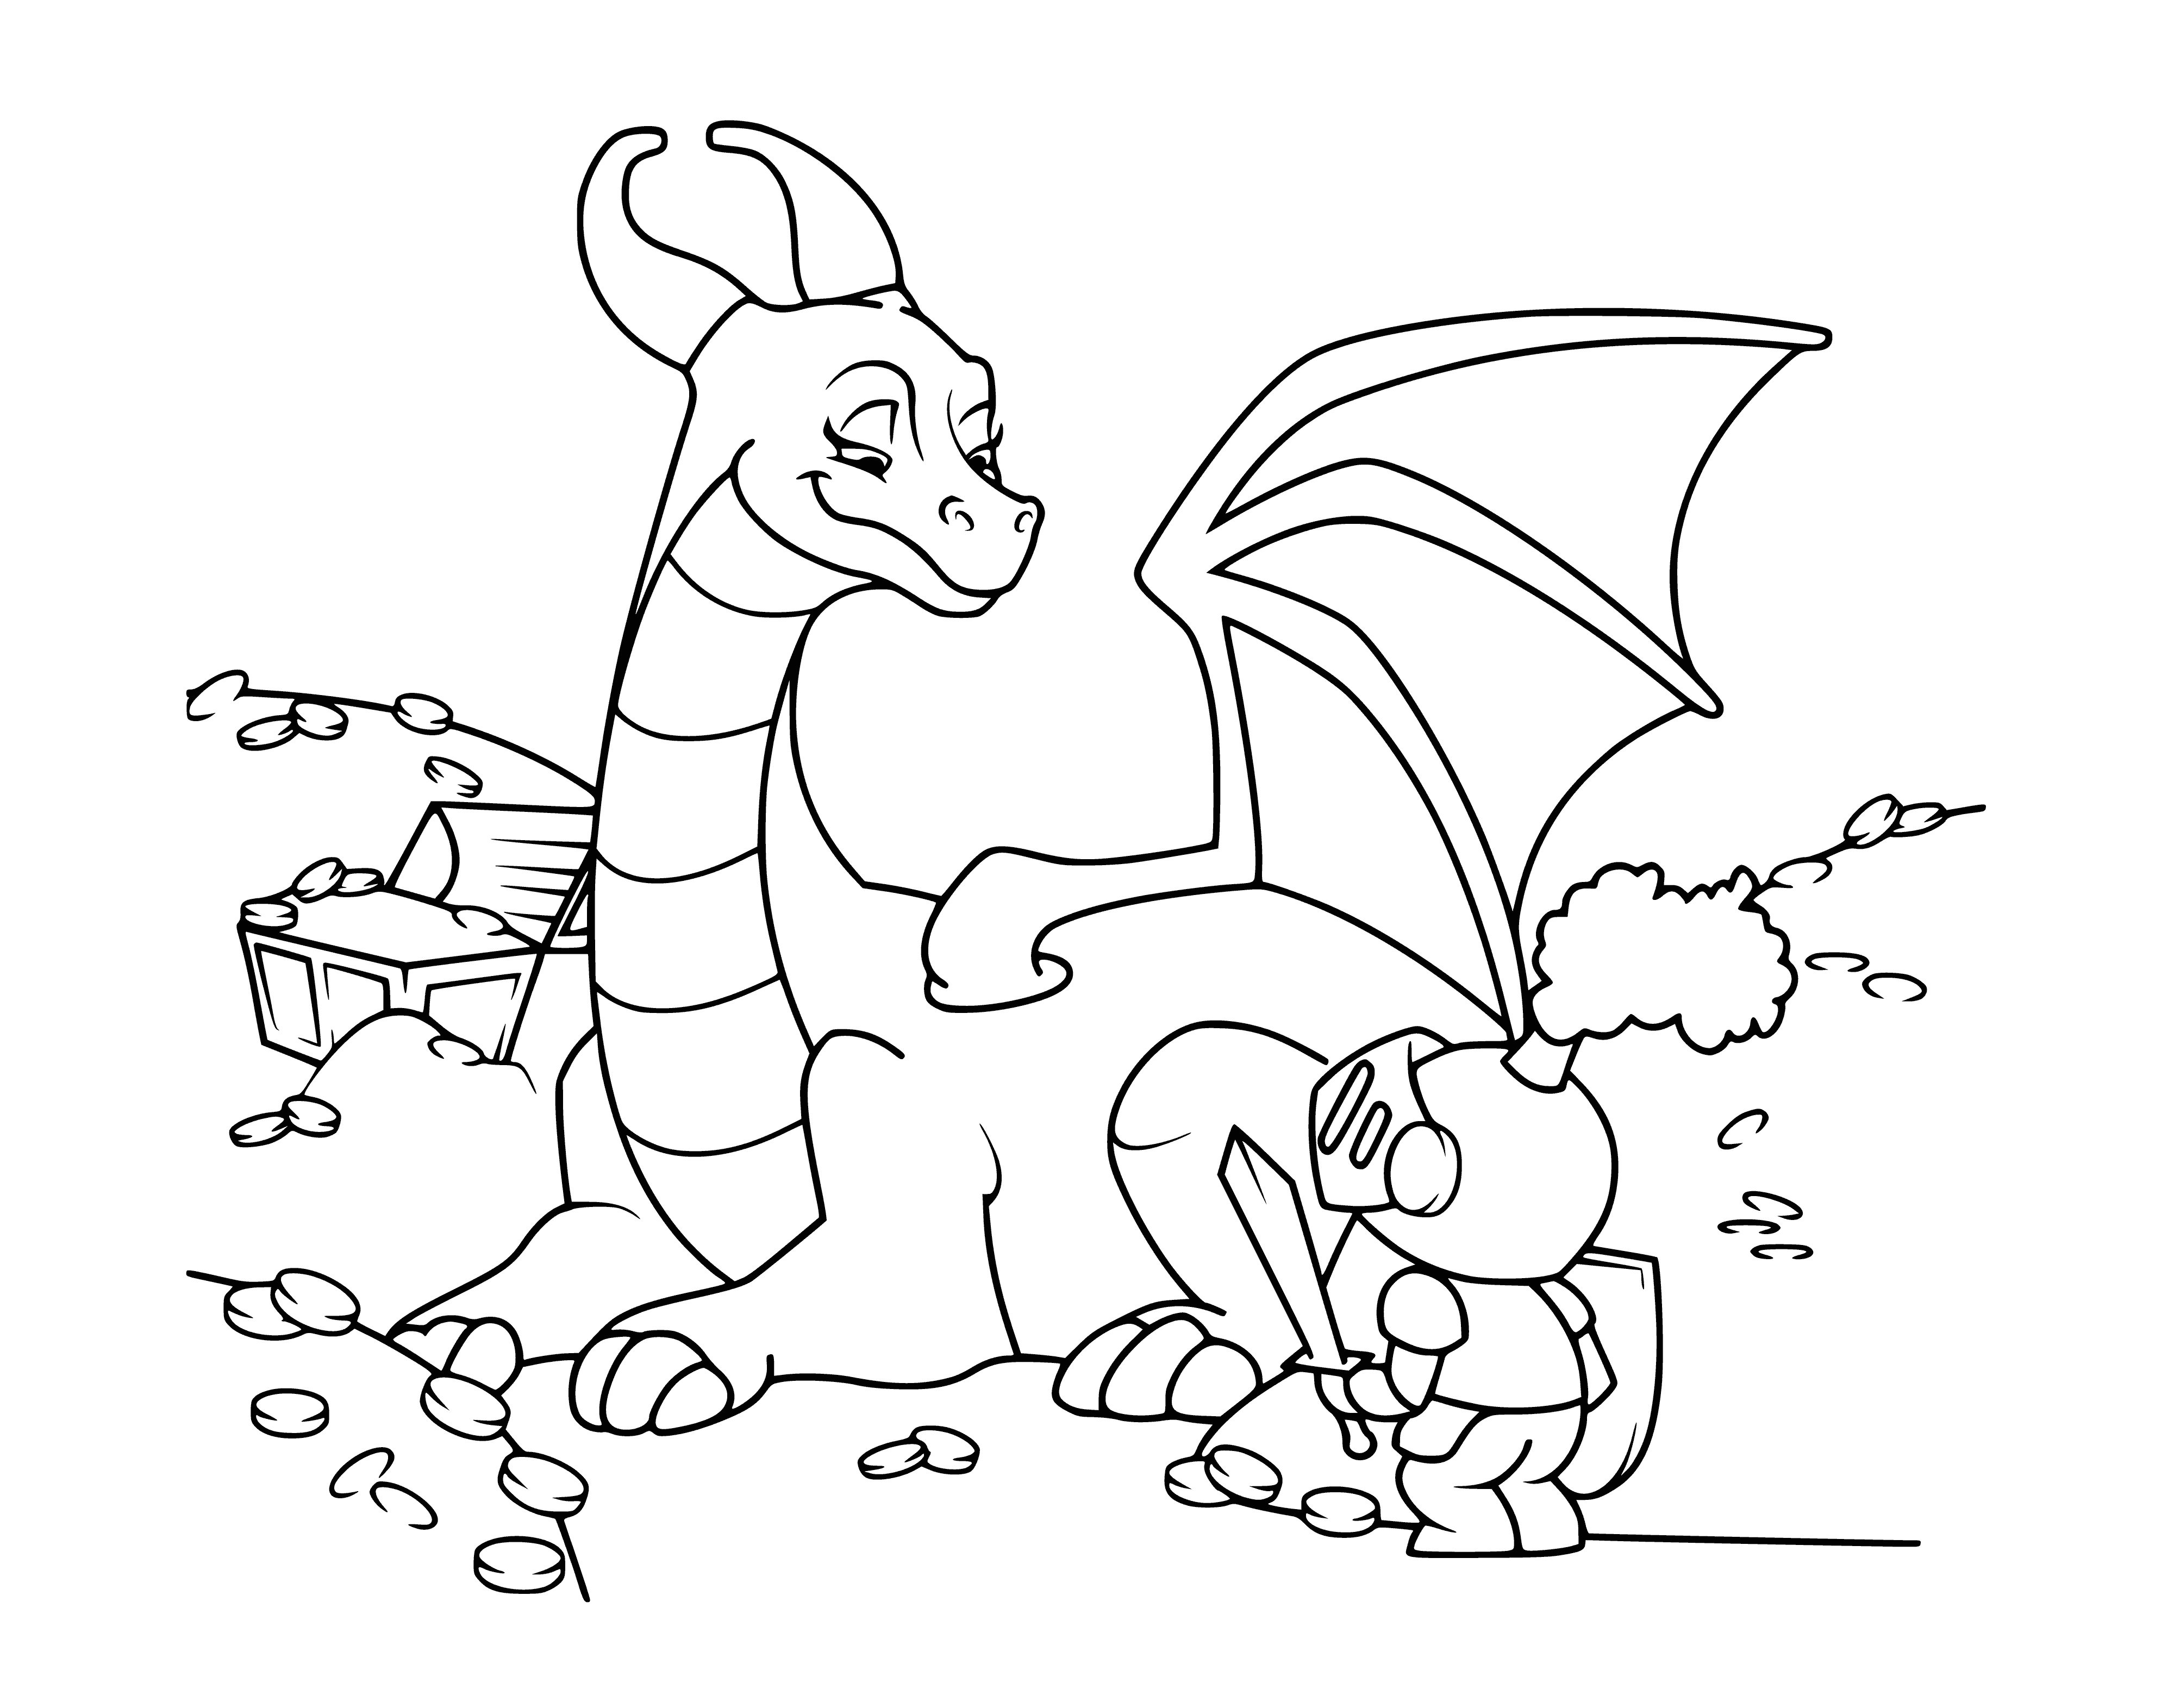 coloring page: A knight faces off with a dragon in front of a castle, flames spewing from the dragon's mouth. Shield emblazoned with a coat of arms in knight's hand.